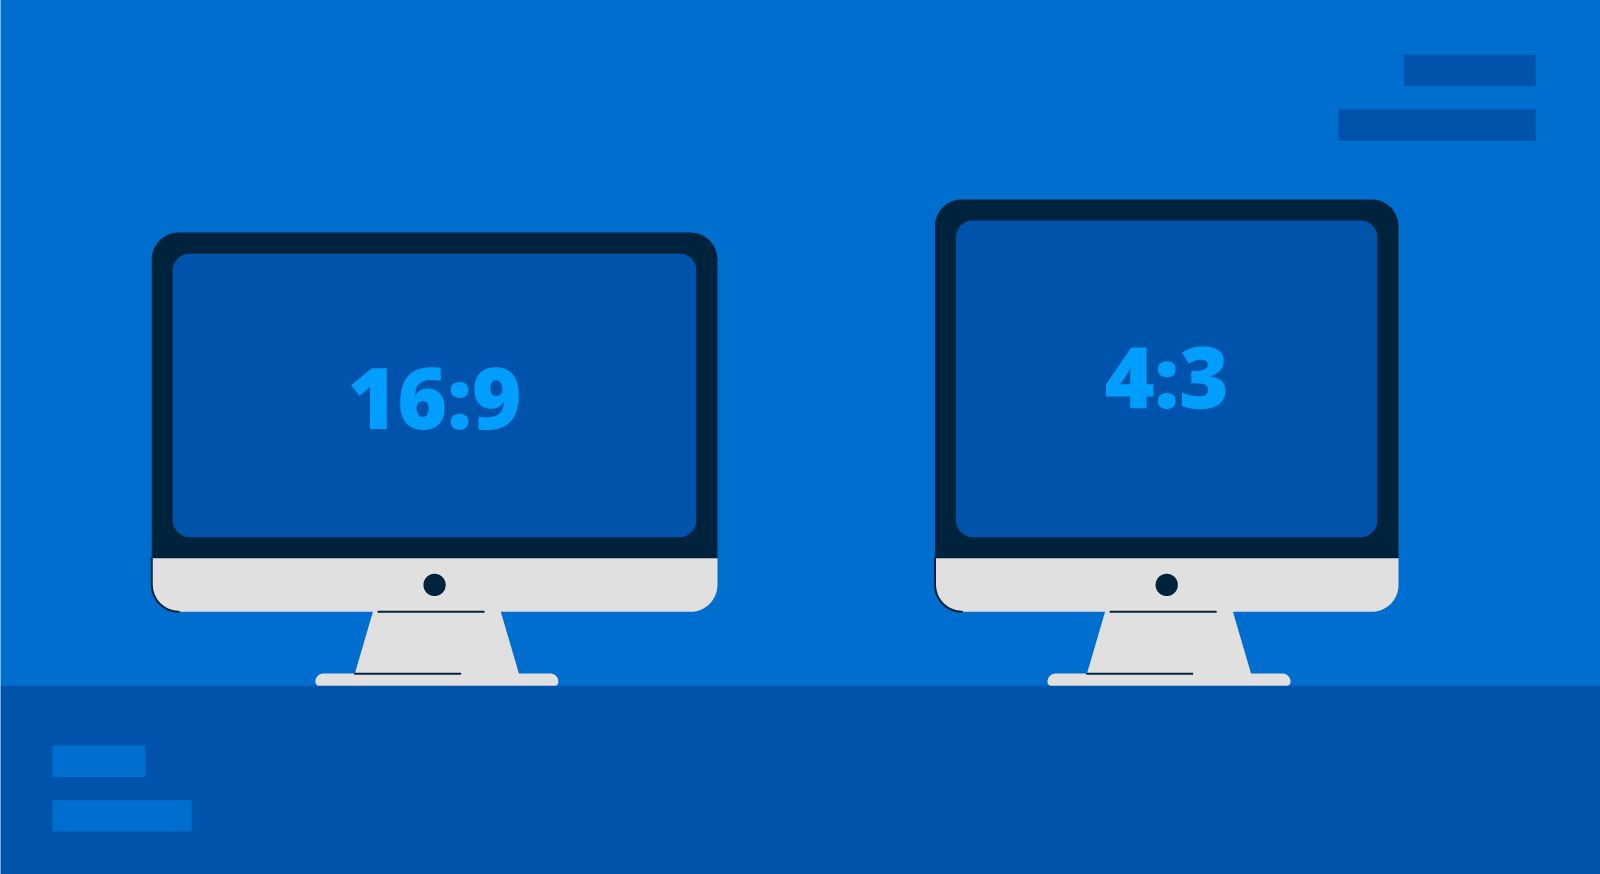 Two popular slide sizes for presentations 16:9 and 4:3